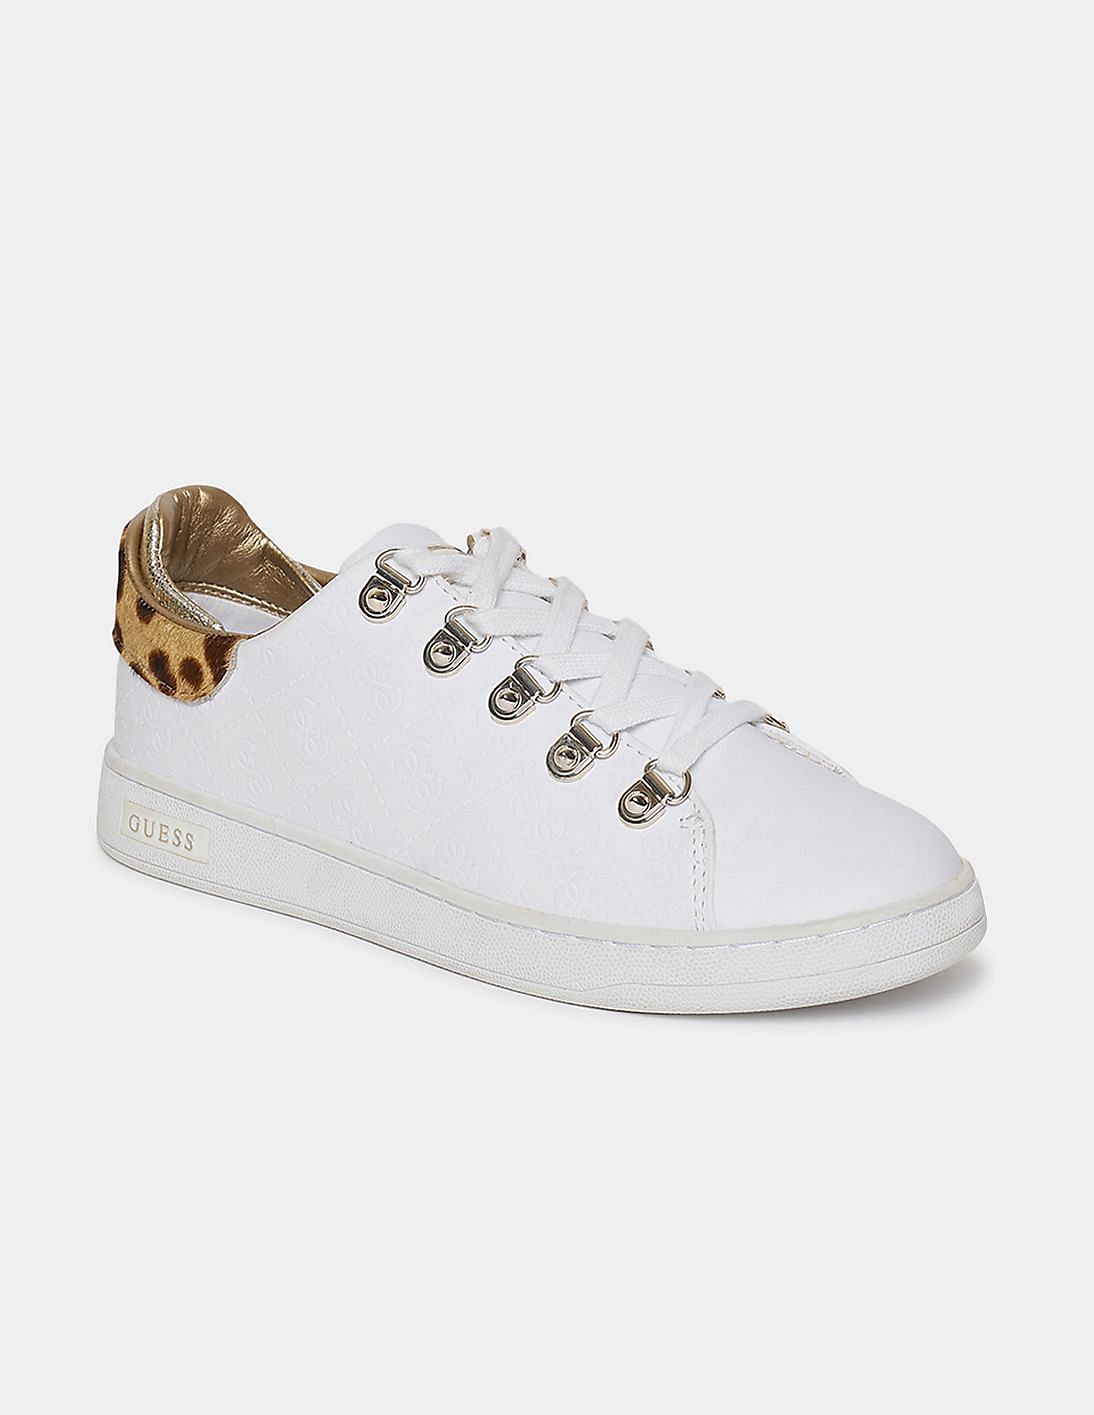 Buy GUESS Women White Contrast Trim Lace Up Sneakers - NNNOW.com